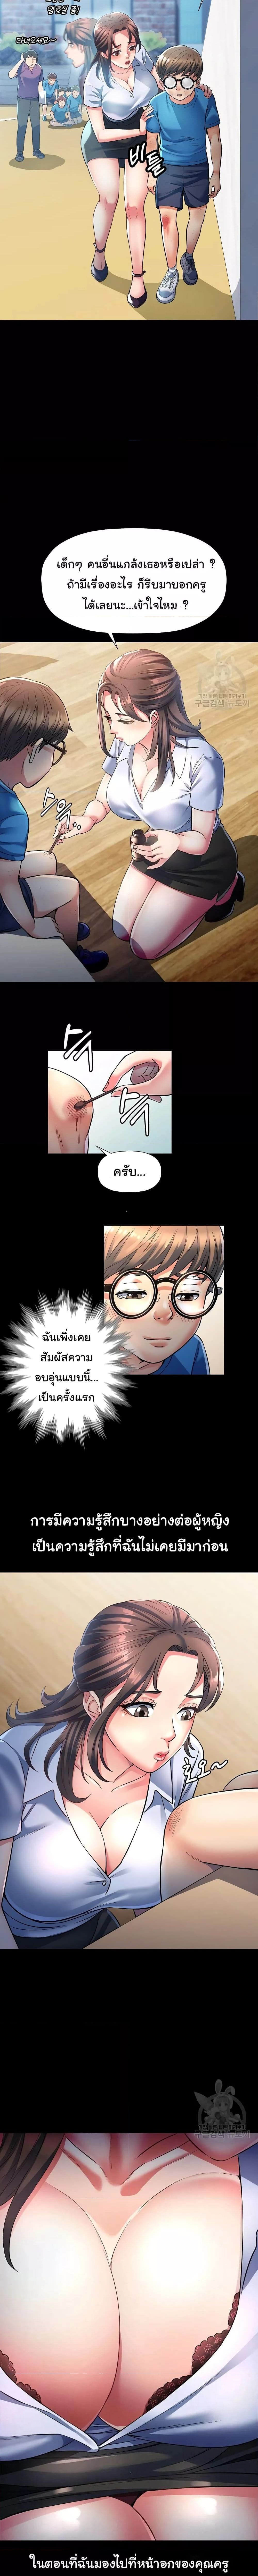 In Her Place ตอนที่ 1 ภาพ 2